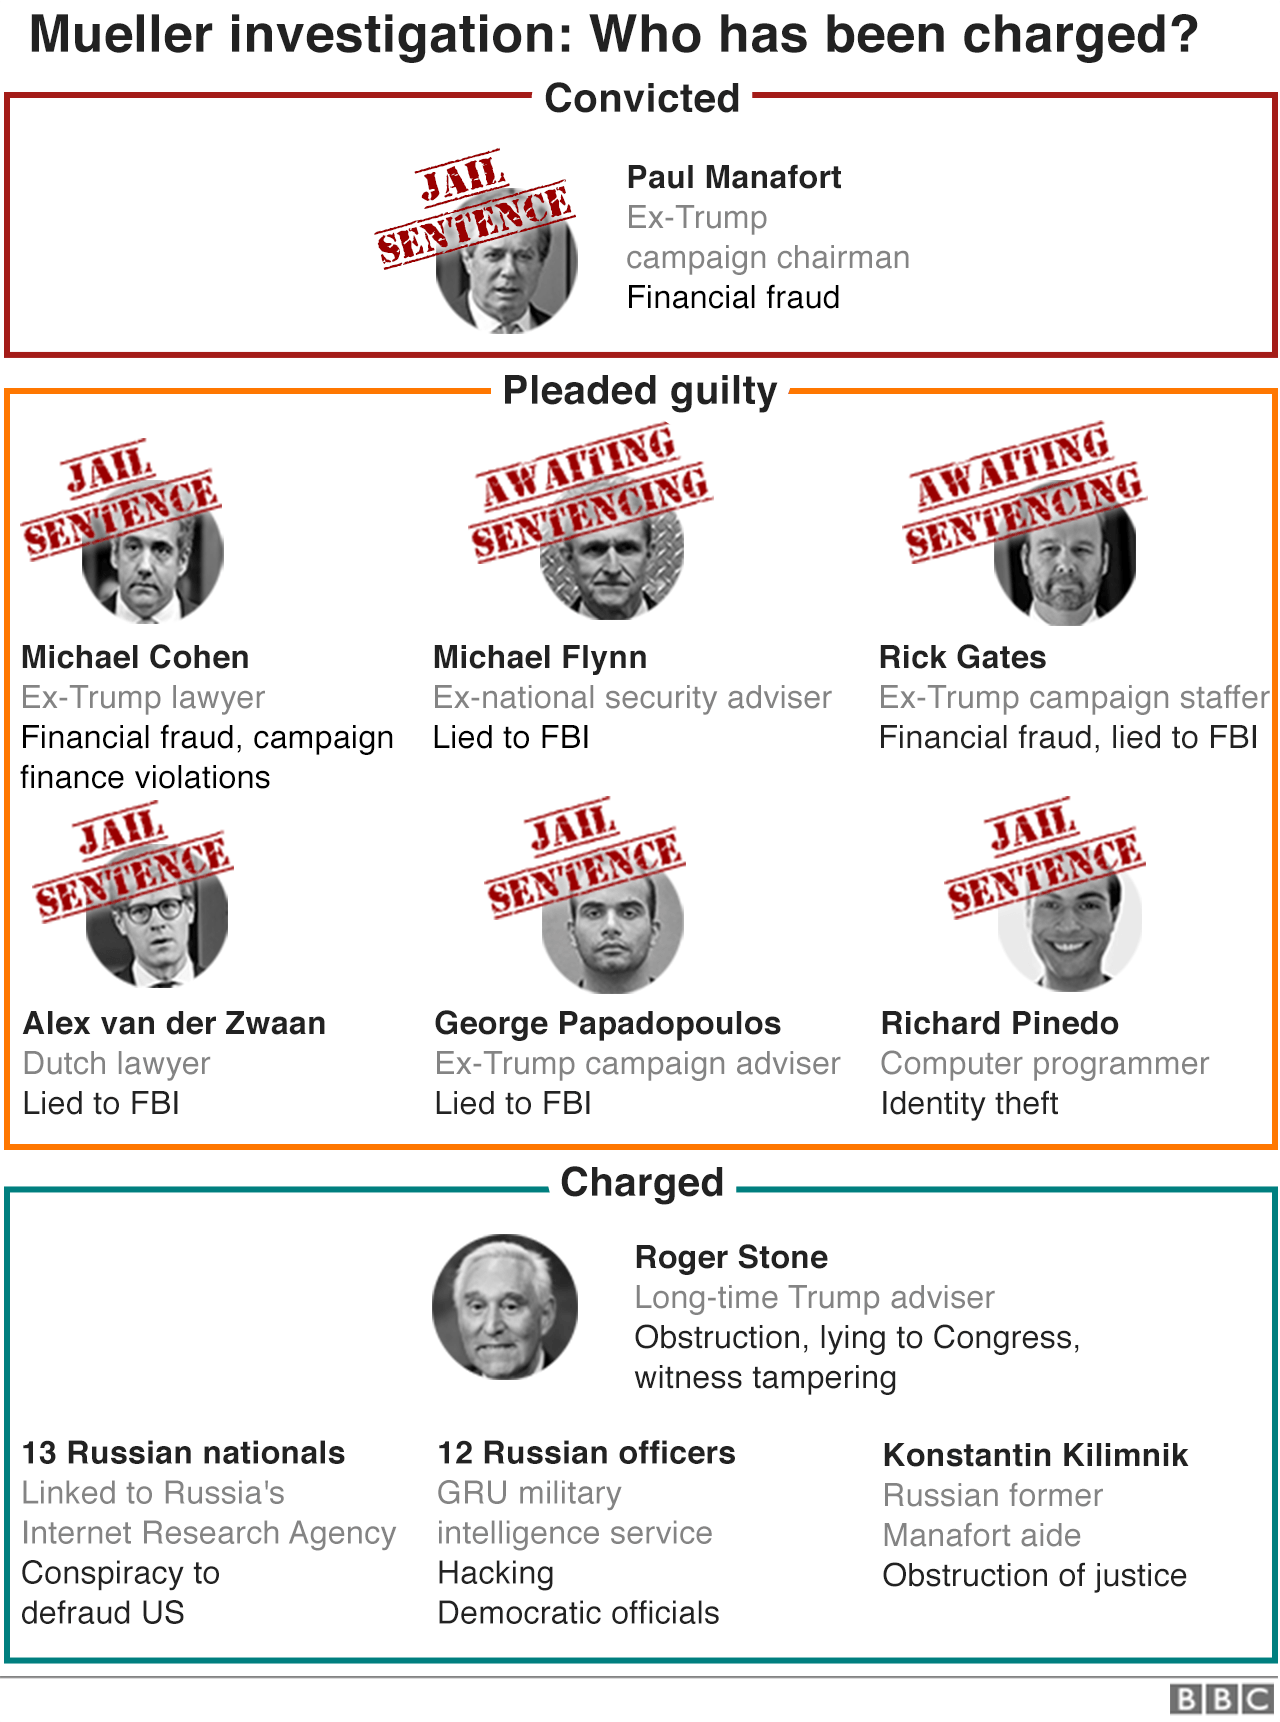 BBC Graphic showing who has been charged in the Robert Mueller investigation, updated 23 March 2019